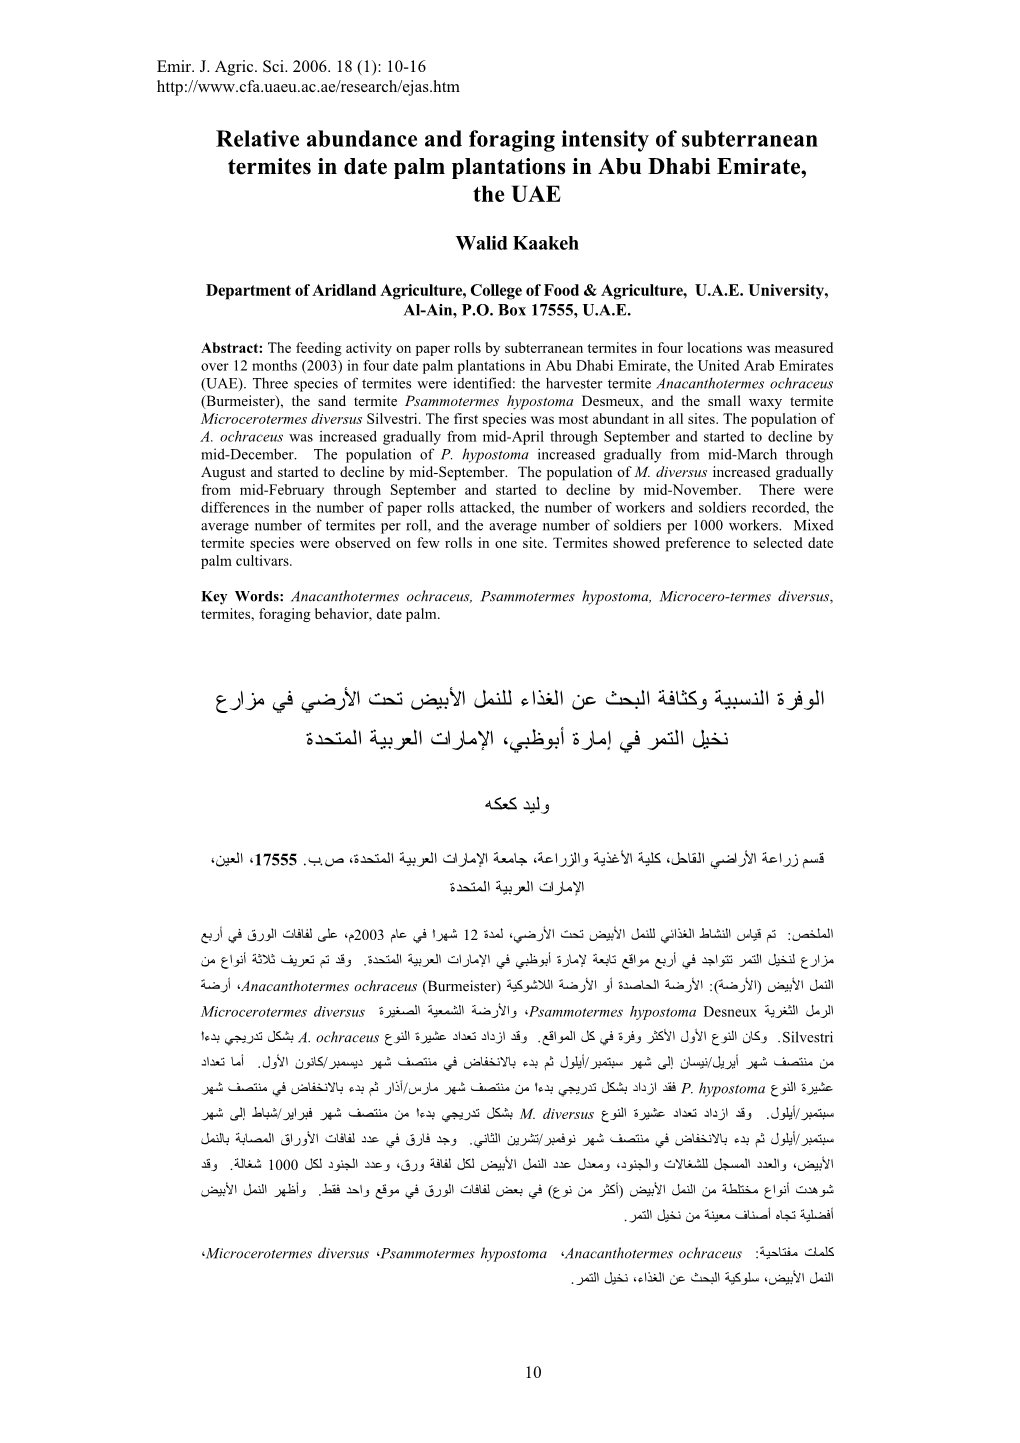 Relative Abundance and Foraging Intensity of Subterranean Termites in Date Palm Plantations in Abu Dhabi Emirate, the UAE